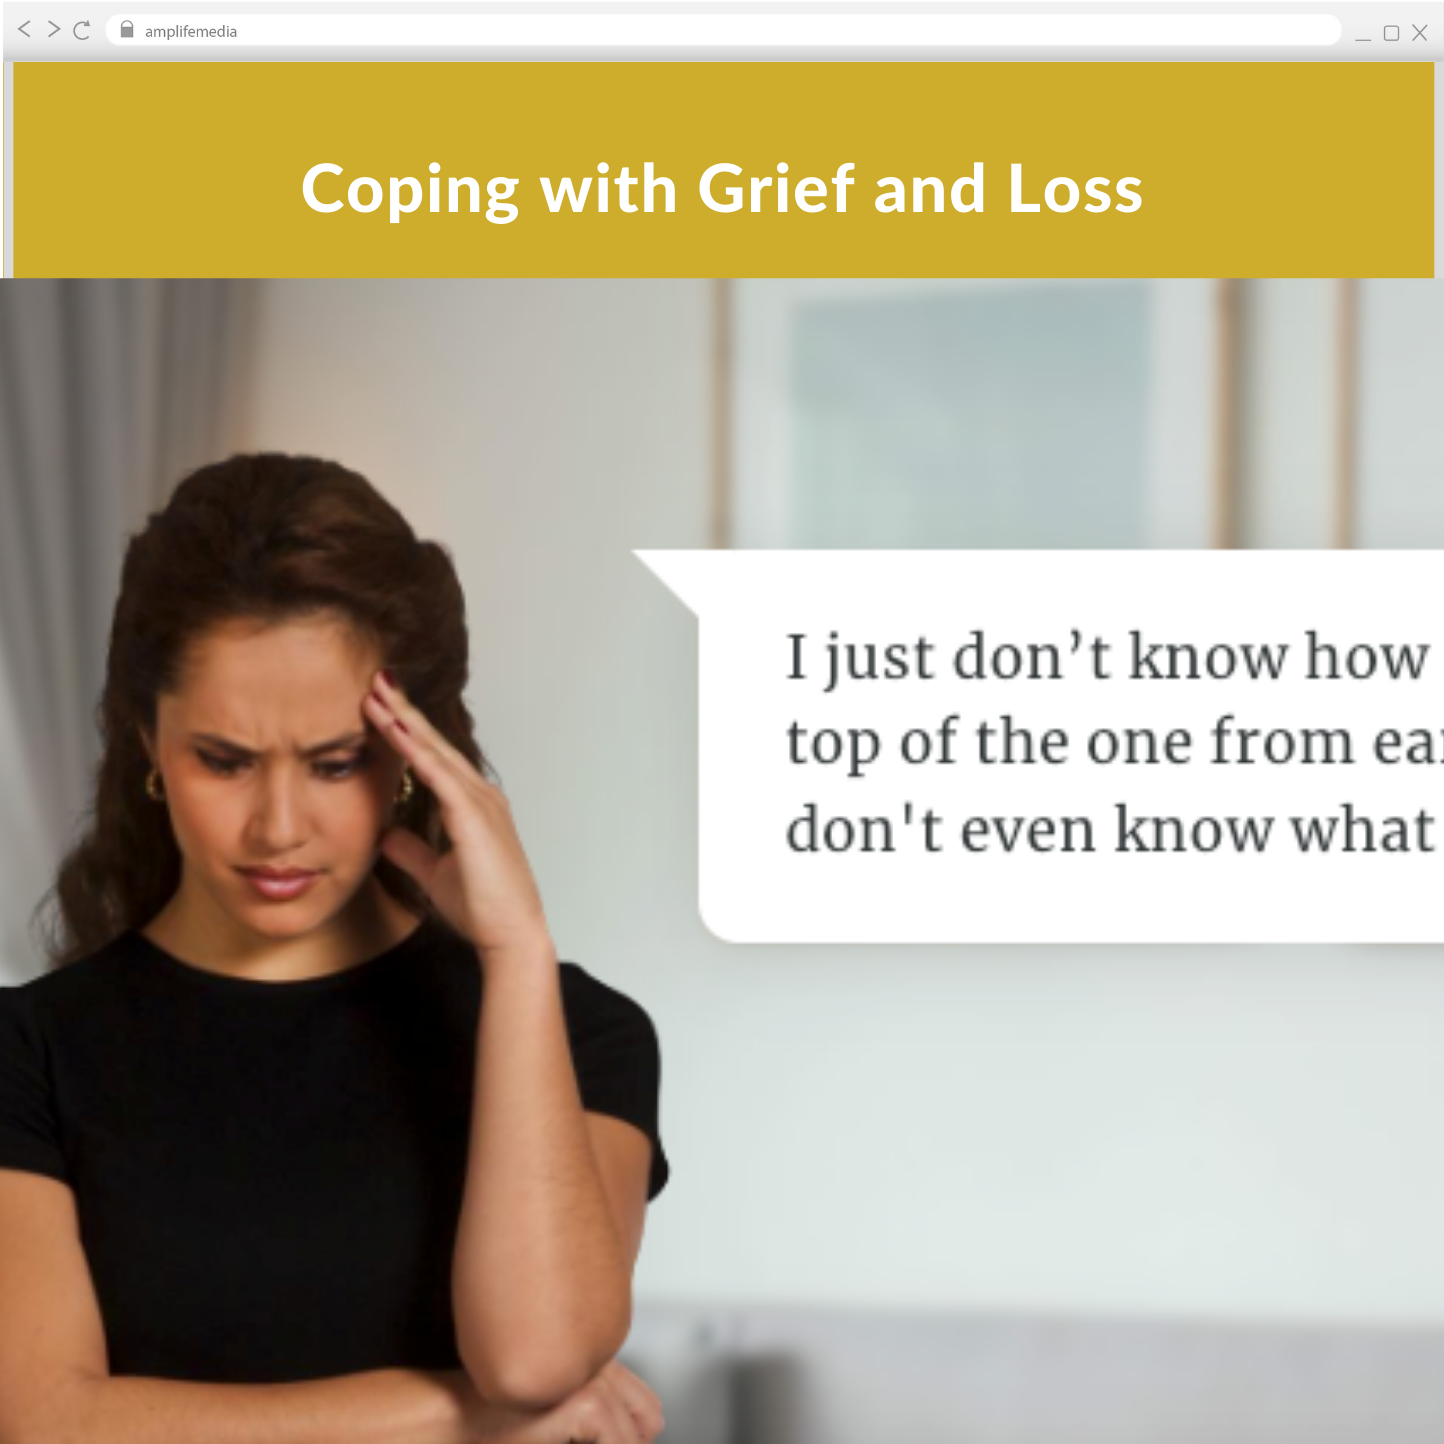 Subscription to Wellbeing Media: Coping with Grief and Loss MT 921